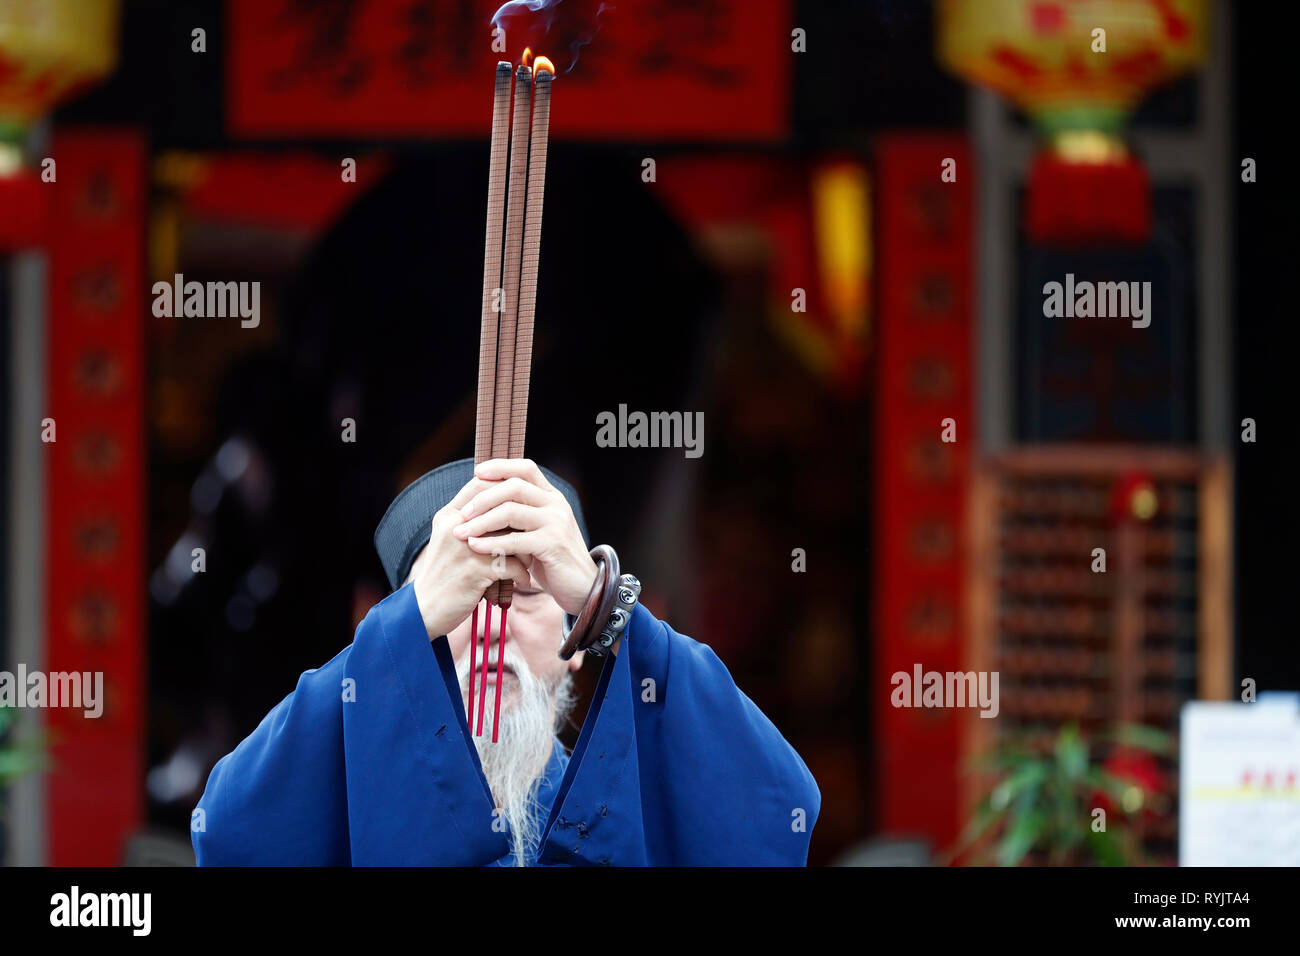 Taoist Mission. Old priest praying with 3 incense sticks.  Singapore. Stock Photo